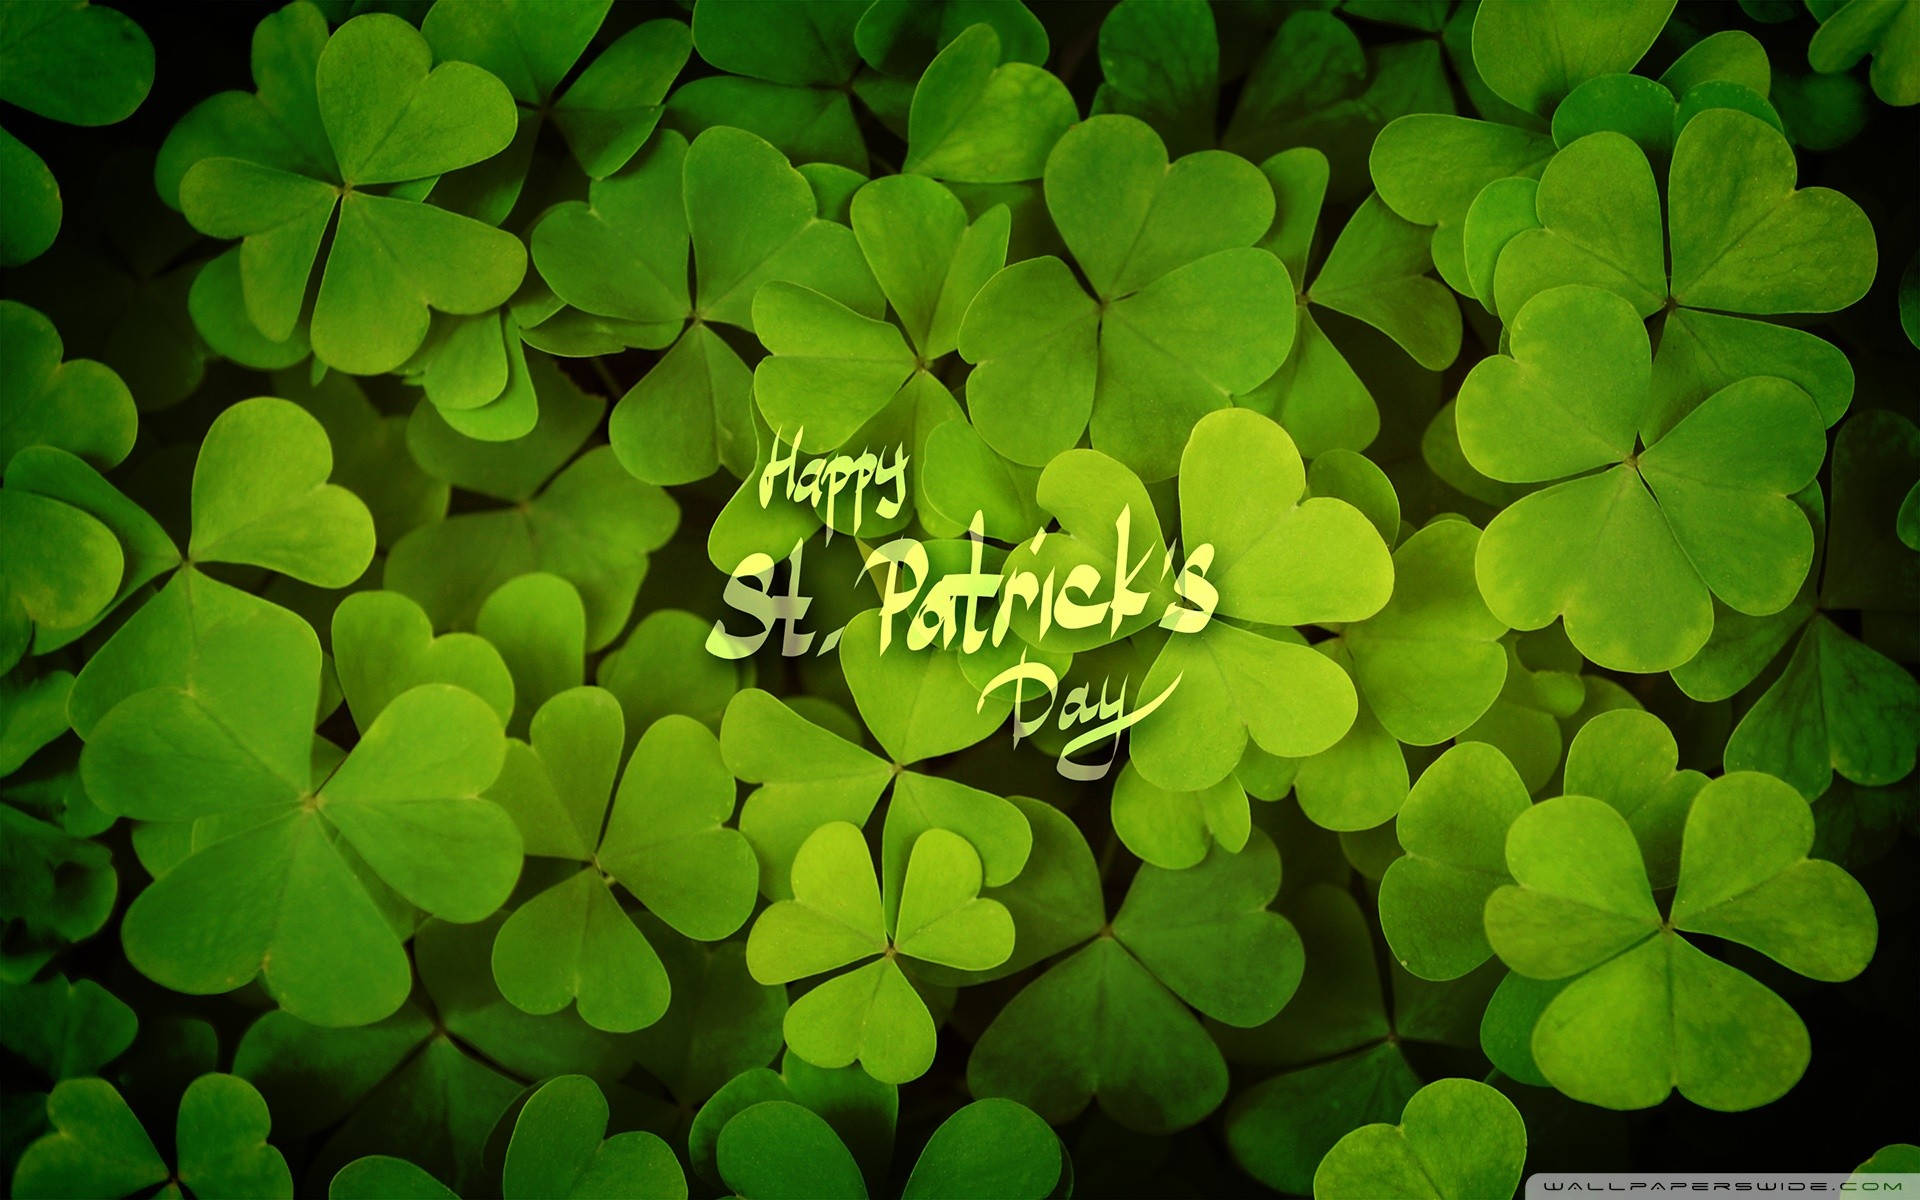 Saint Patrick’s Day Greetings Background